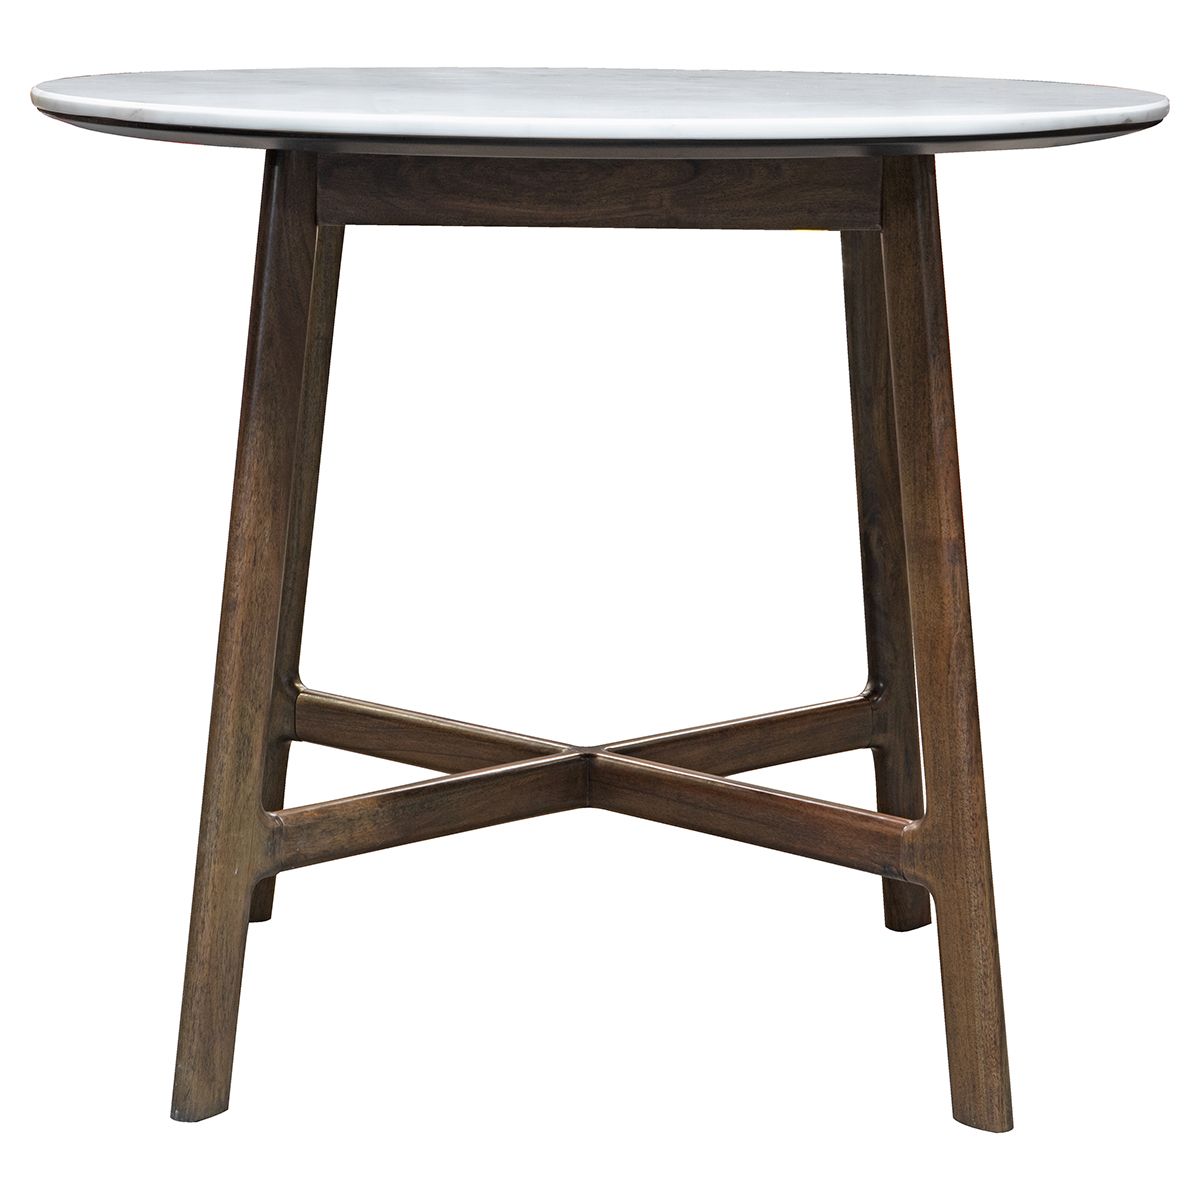 Marello Acacia Walnut Stained Round Dining Table with Marble Top